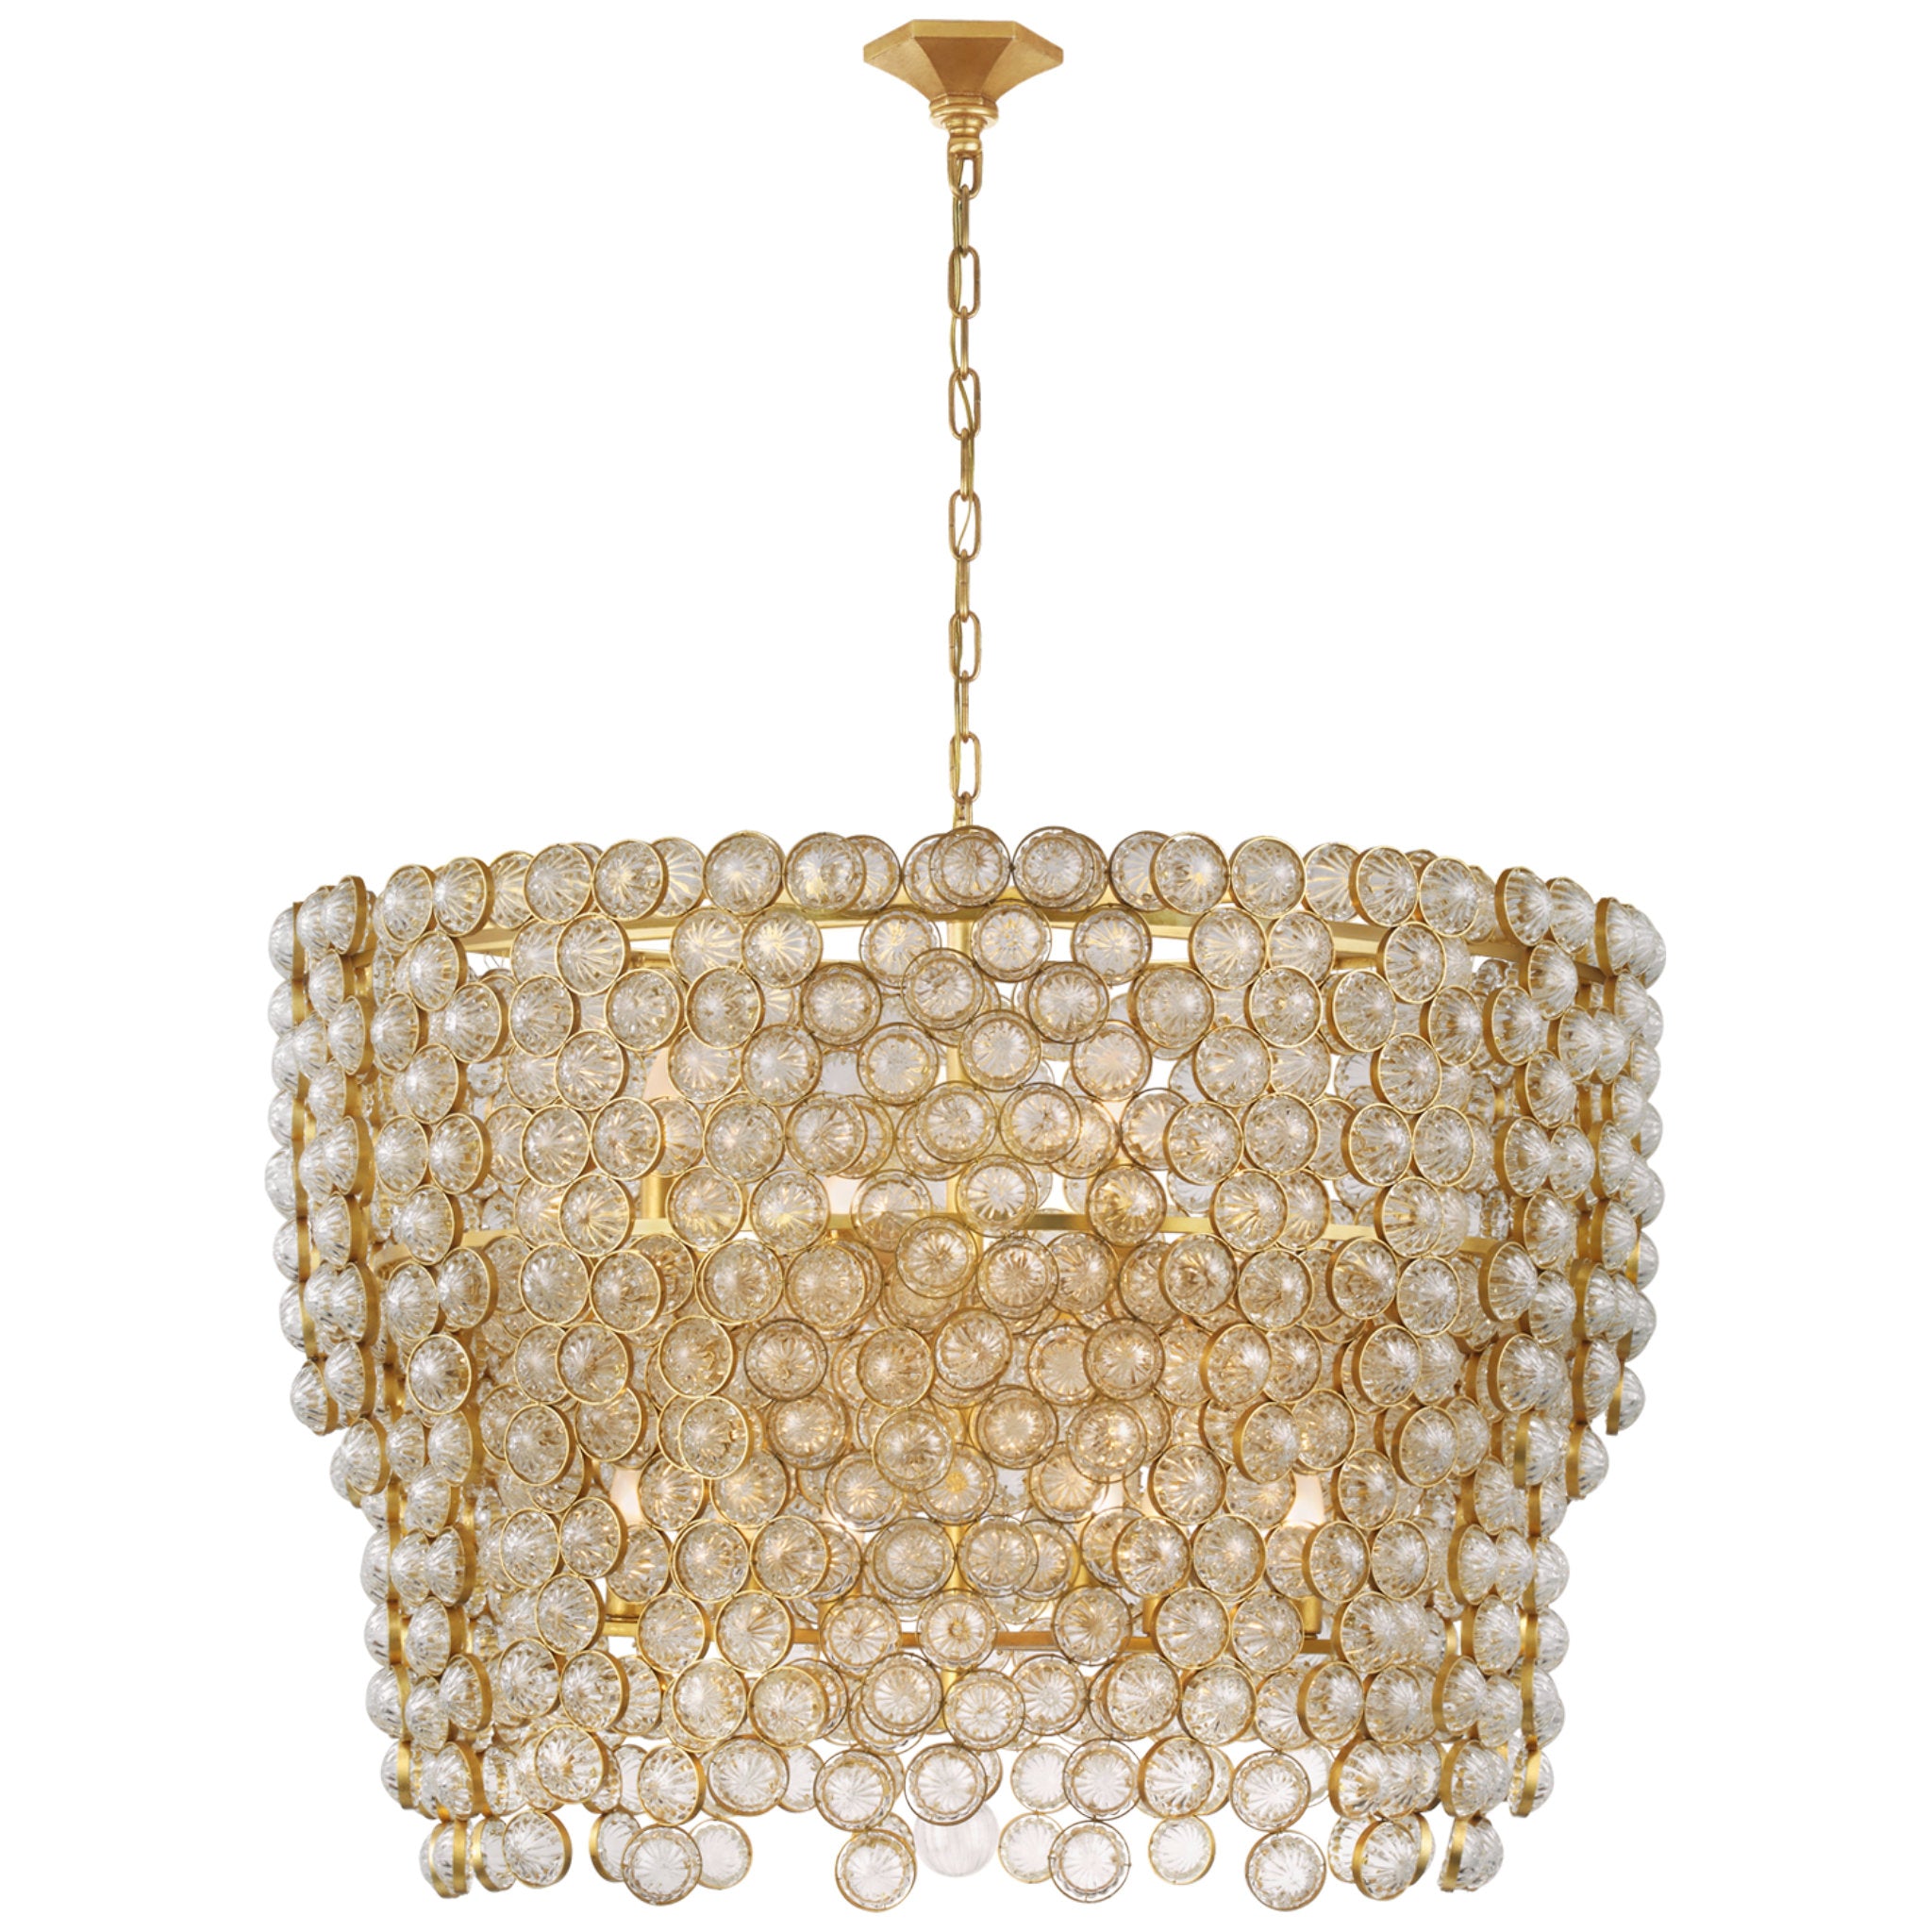 Julie Neill Milazzo Large Waterfall Chandelier in Gild and Crystal